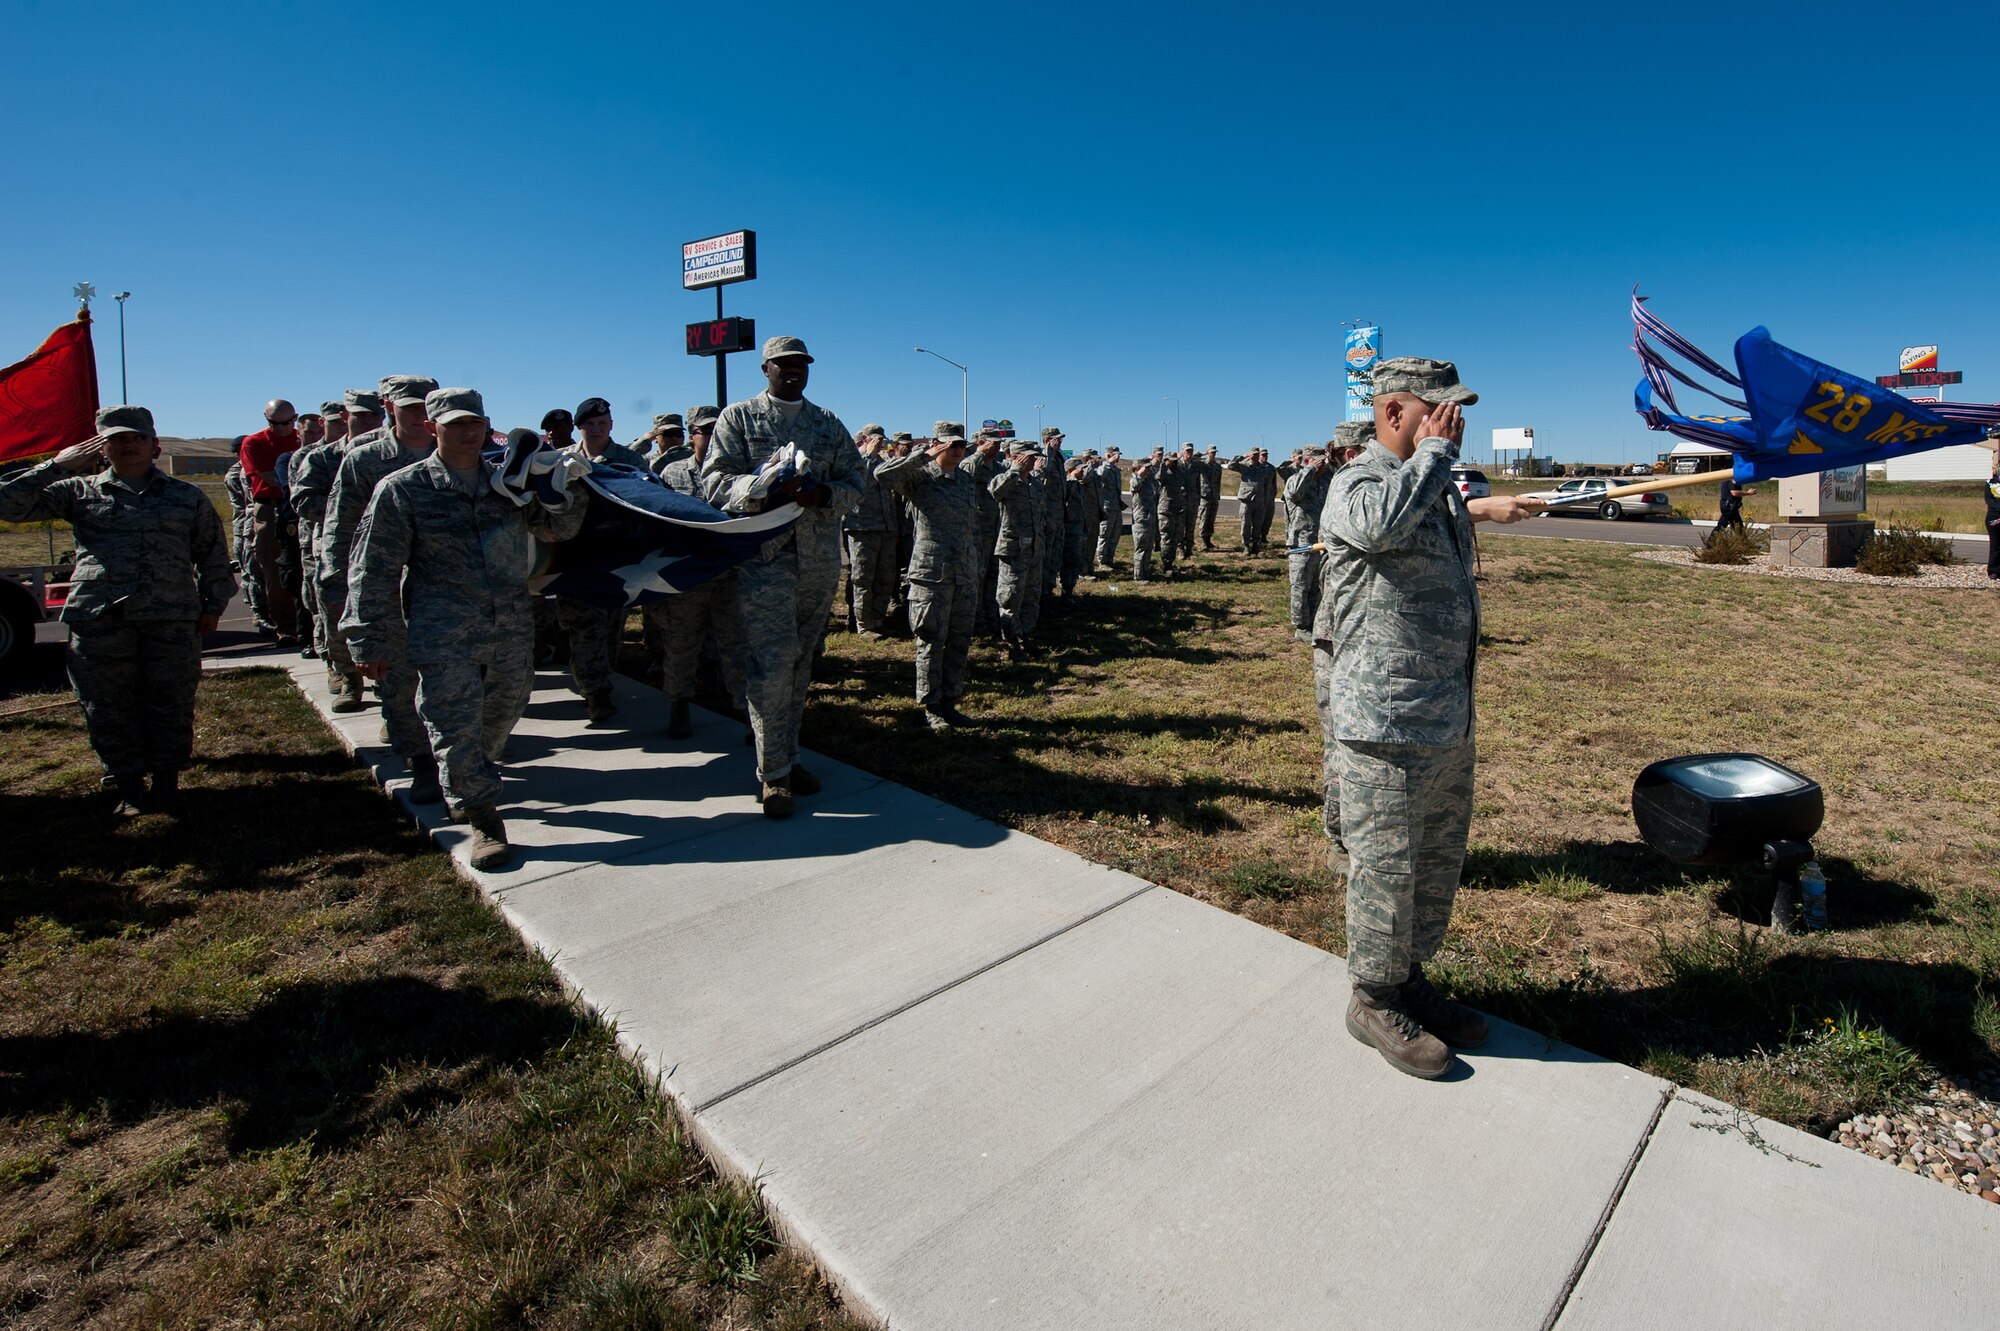 Airmen of the 28th Security Forces Squadron carry a large American flag while comrades from other units render proper customs during a flag raising ceremony as part of the 9/11 Remembrance Ruck March on Ellsworth Air Force Base, S.D., Sept. 8, 2012. Nearly 150 Ellsworth Airmen, family members and friends teamed up with area police officers, firefighters and other first responders for the 11-mile rucksack march to commemorate the 11th anniversary of 9/11. (U.S. Air Force photo by Airman 1st Class Kate Thornton-Maurer)